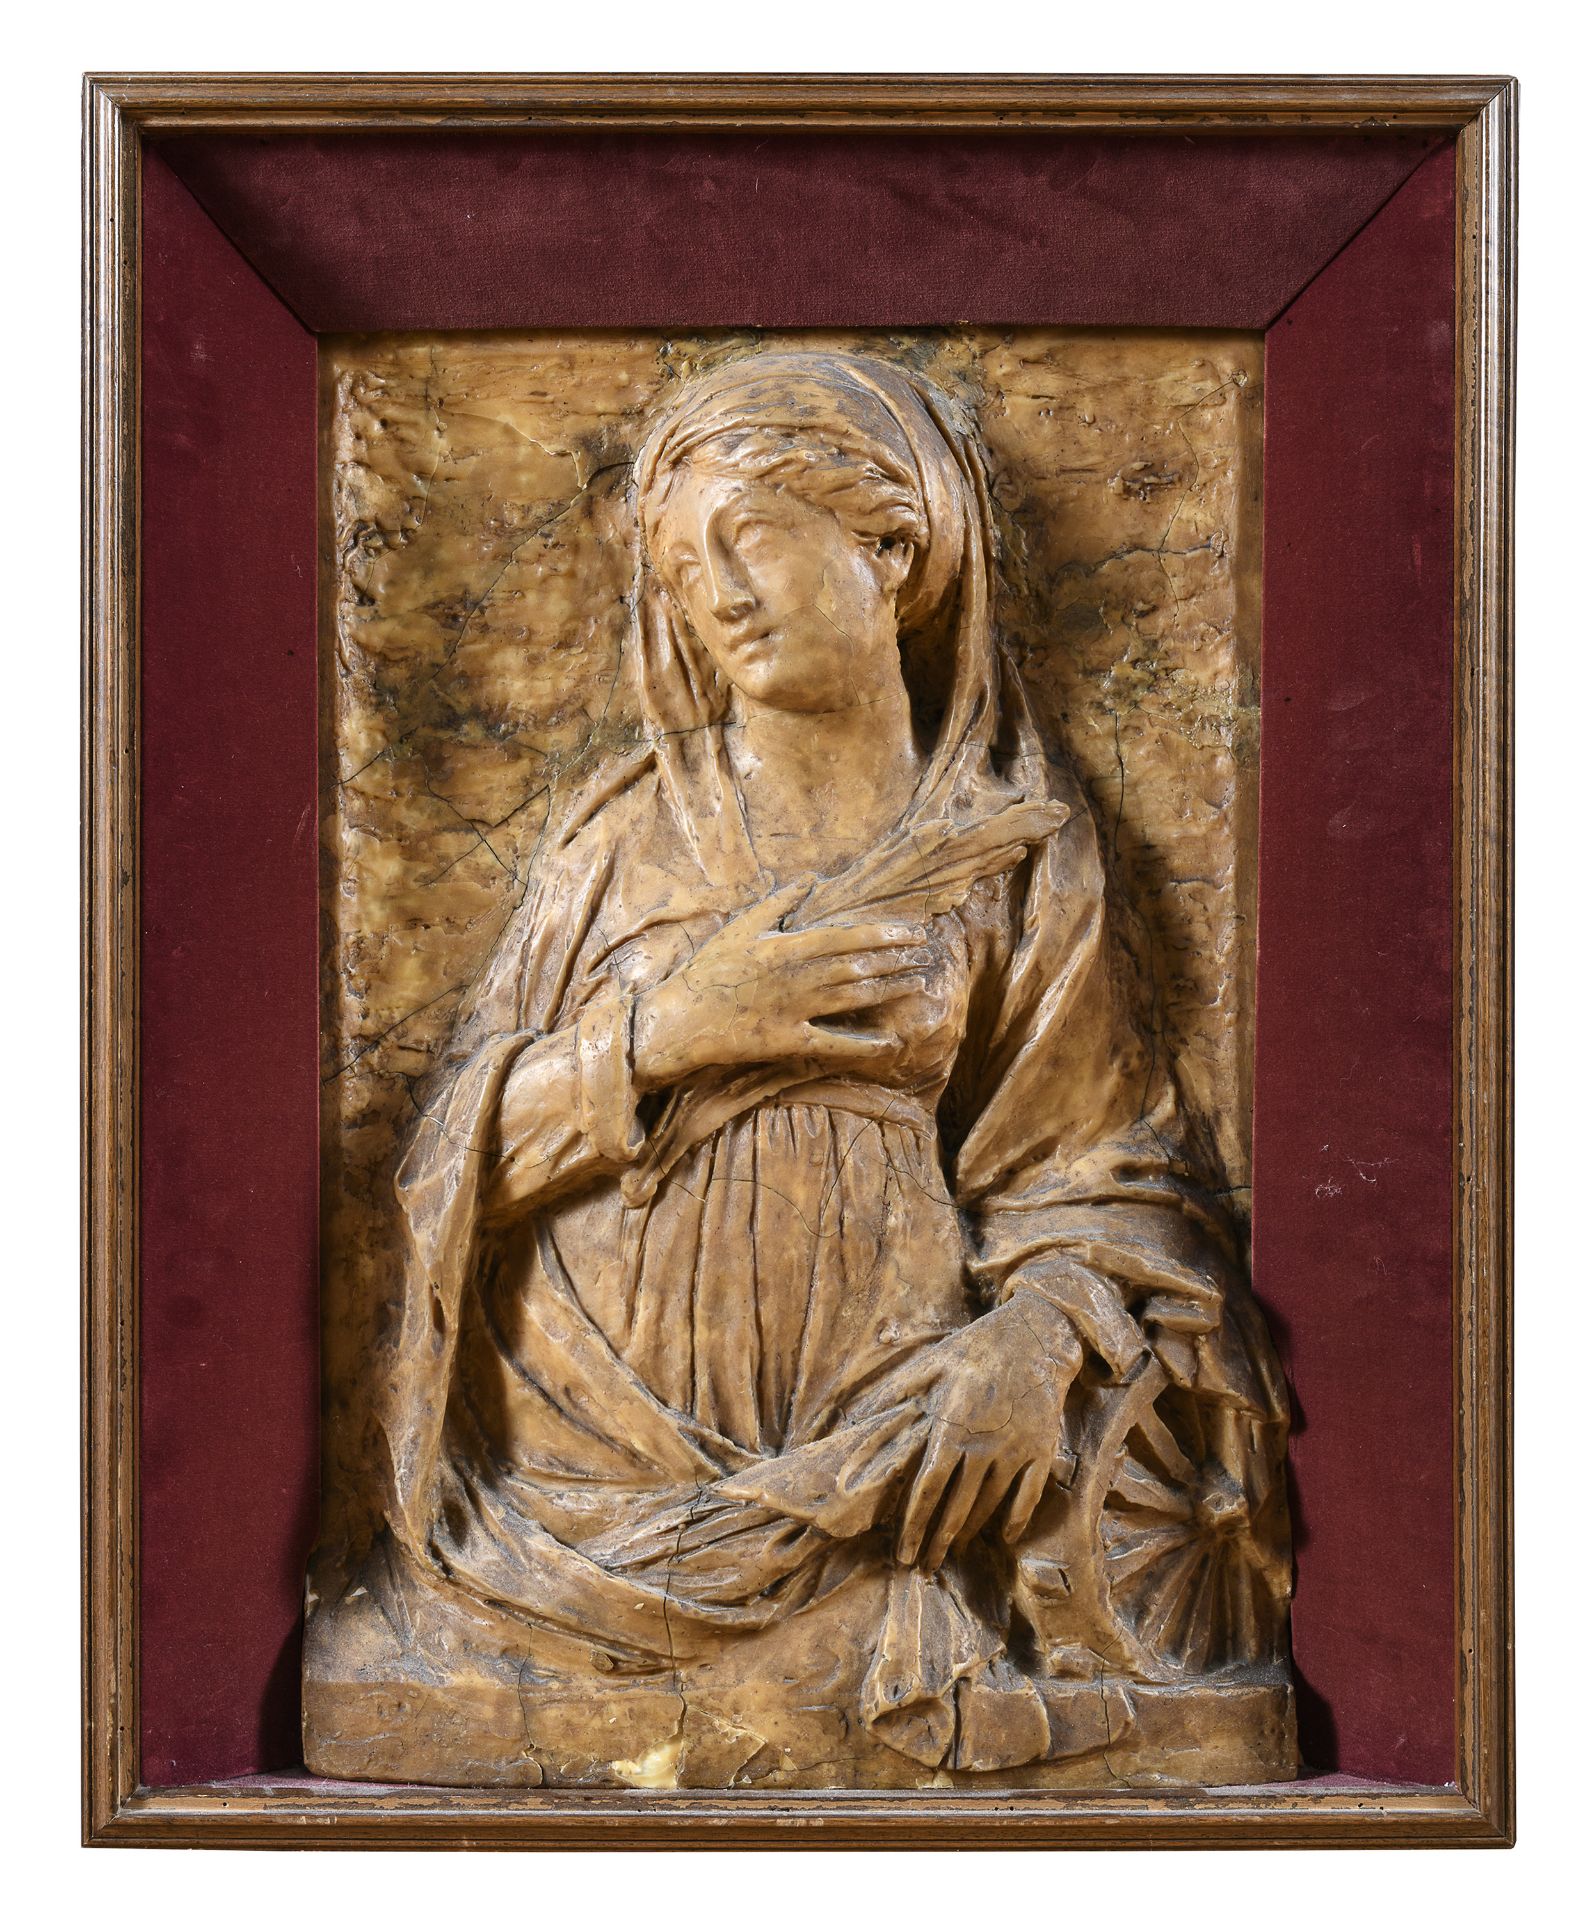 WAX HIGH-RELIEF BY ALCEO DOSSENA